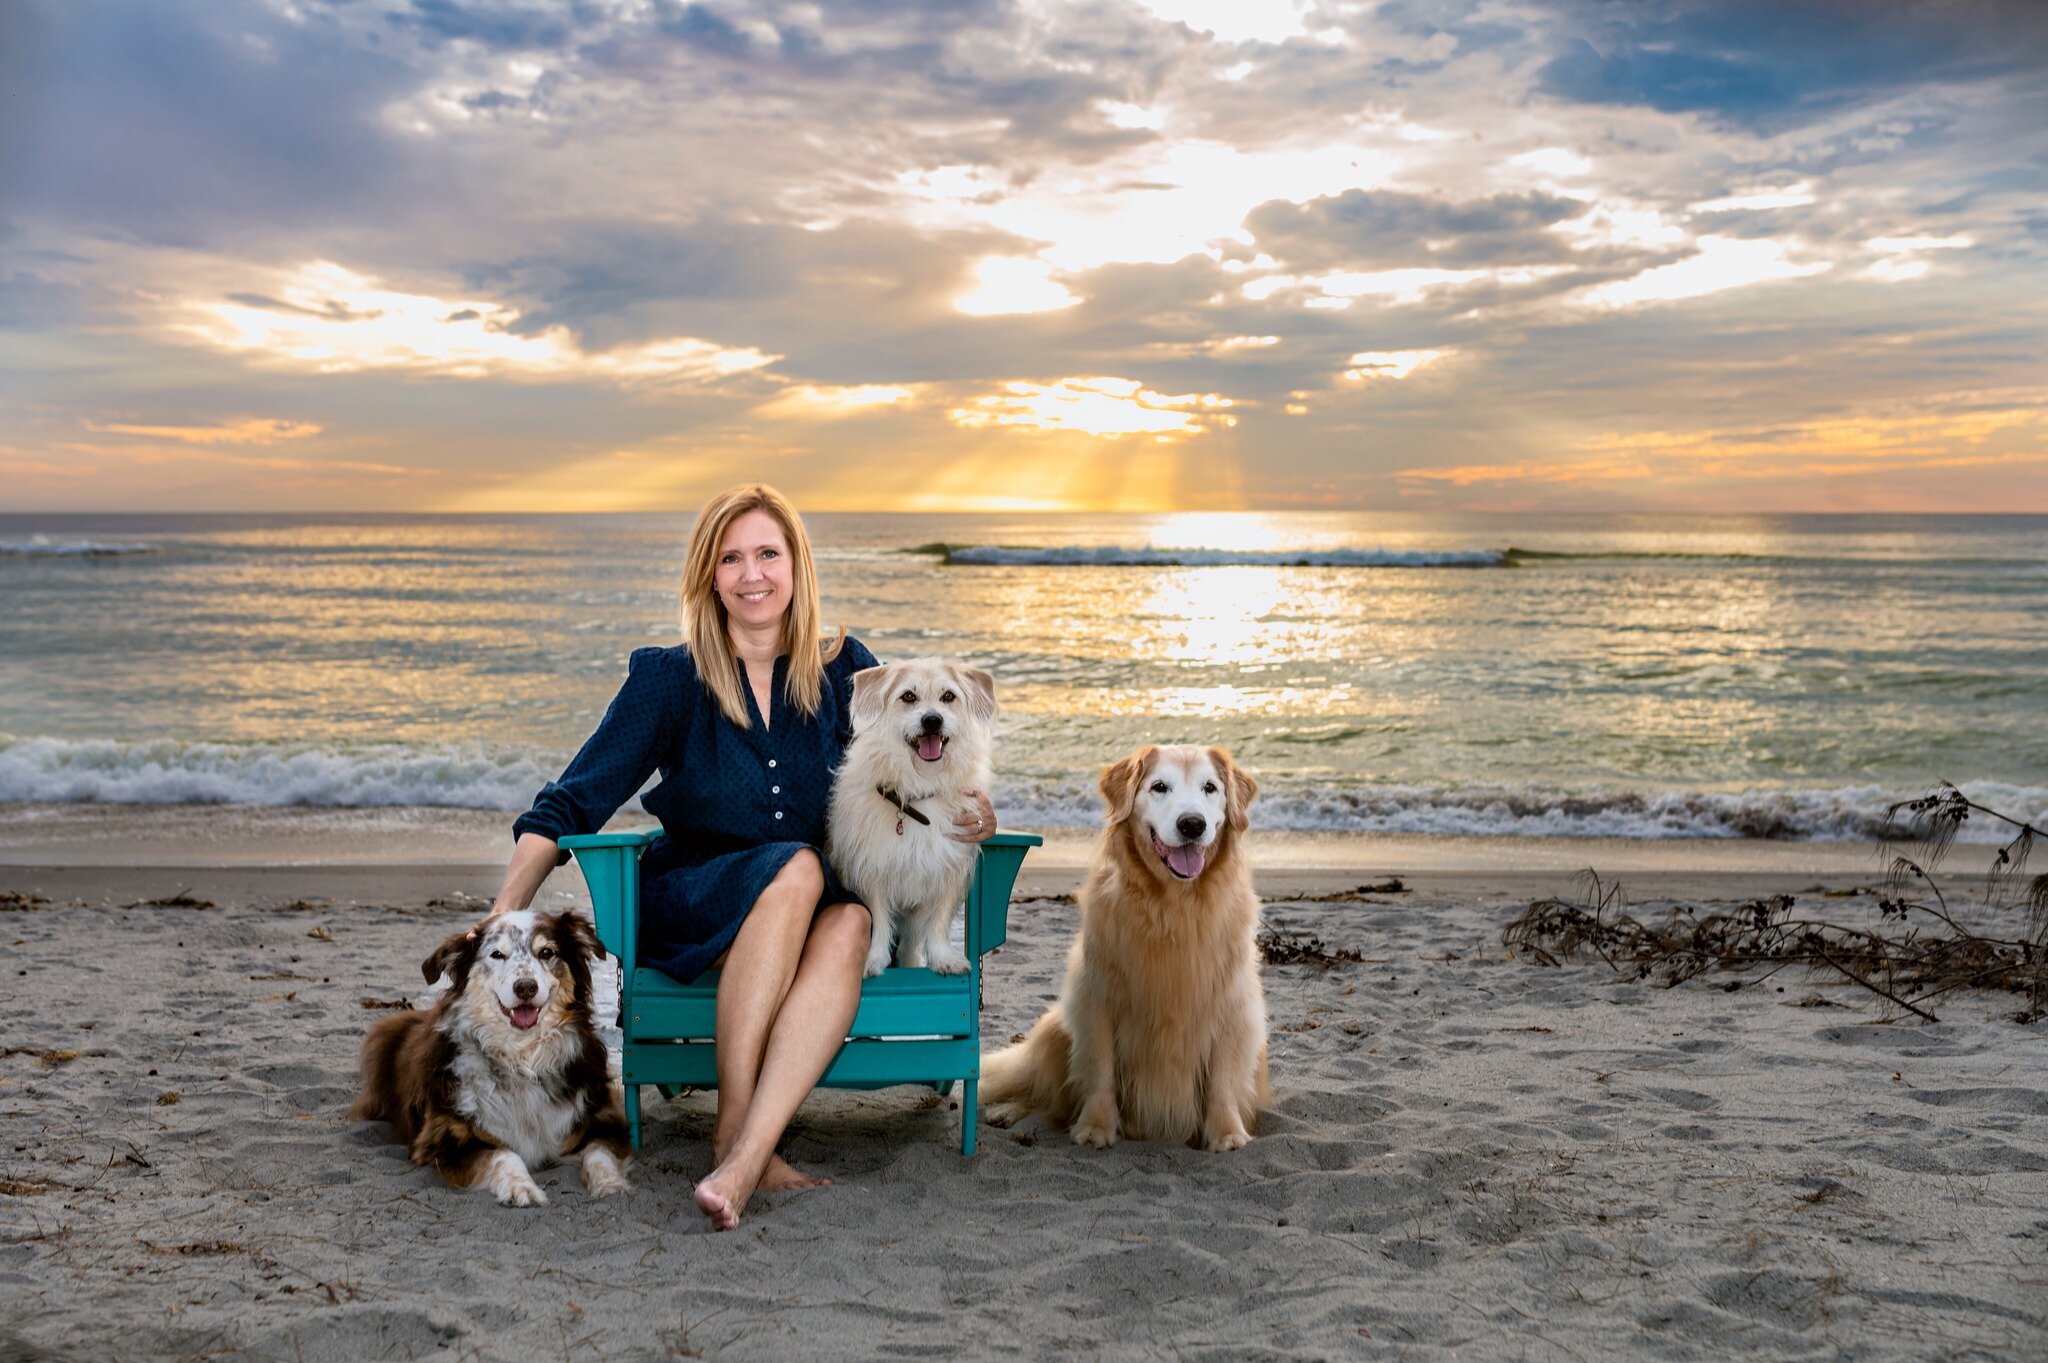 It's no surprise that photos are really important to me. This one. It means the world. It was taken shortly before my golden retriever got sick with cancer. It is and will always be the last photo of me with my girls. 

Taken at my favorite place on 